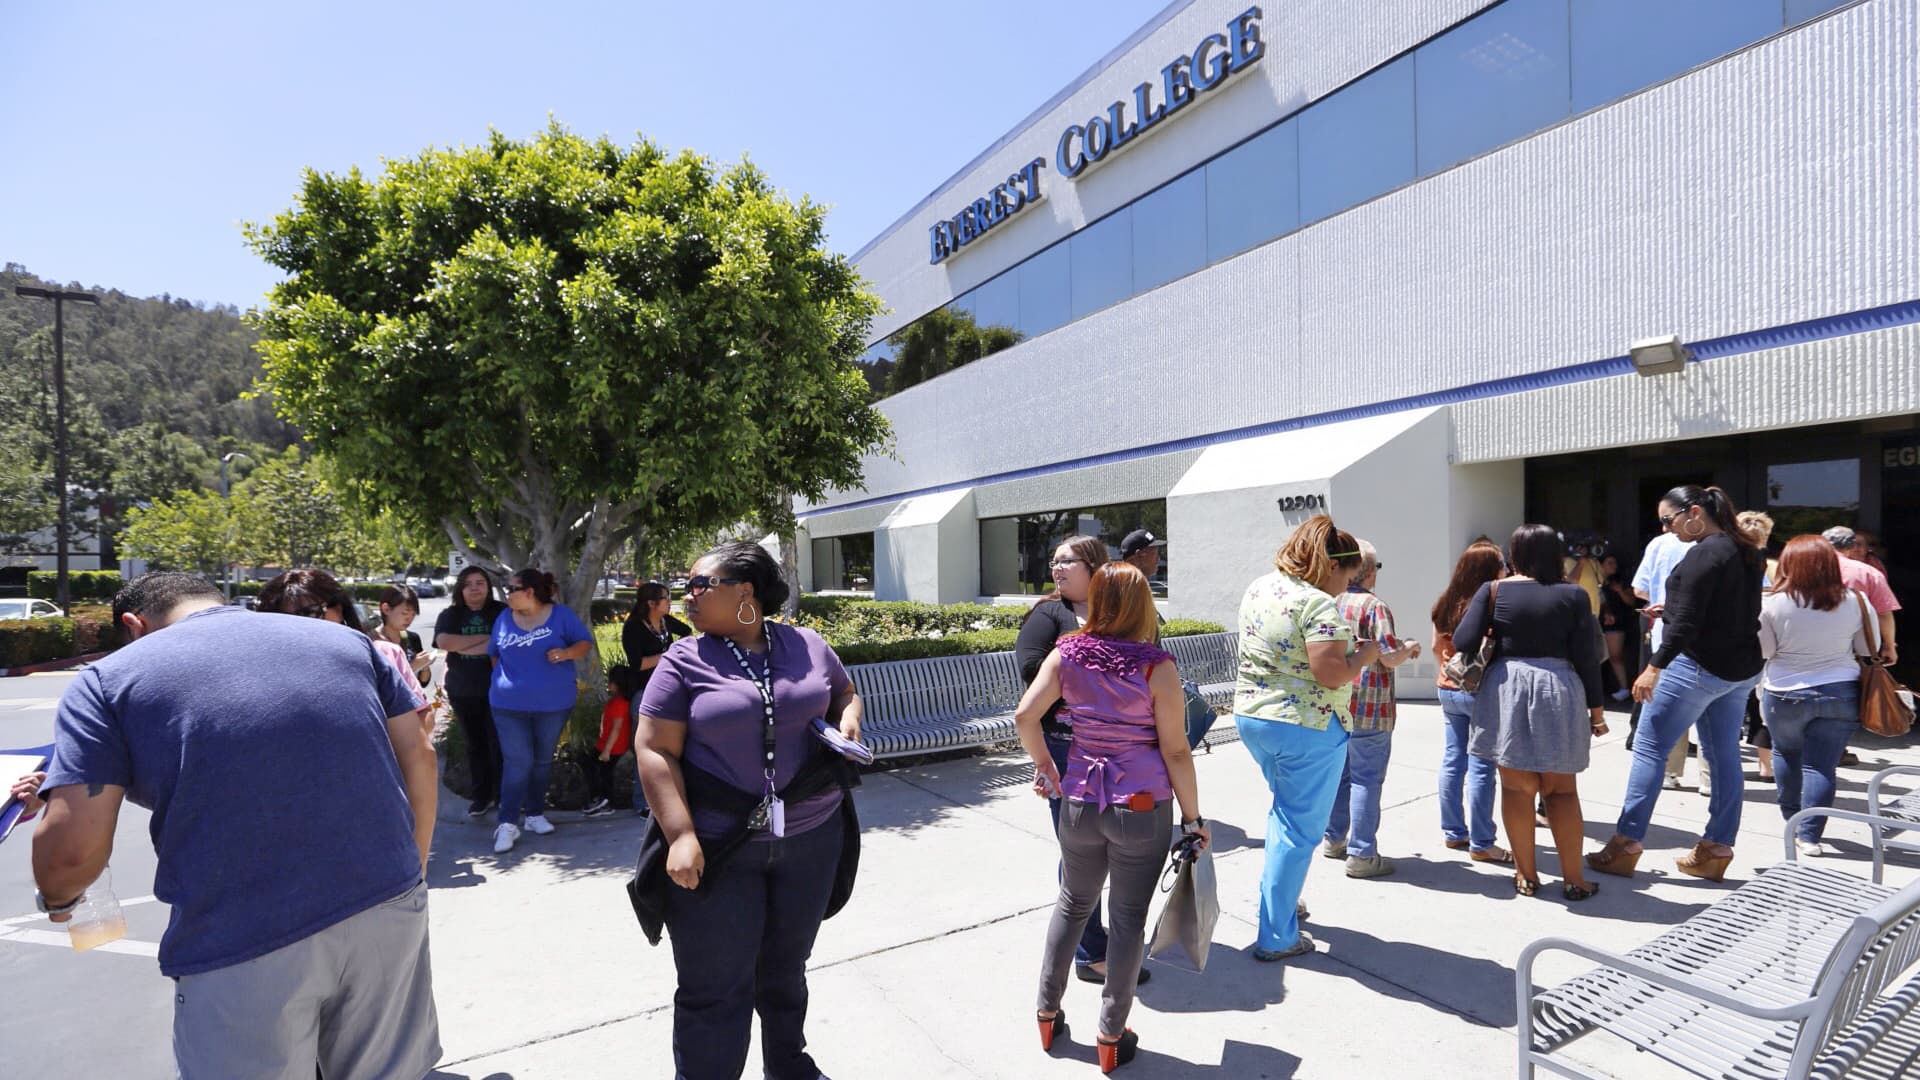 Teachers line up to enter Everest College, one of the Corinthian Colleges that closed, for a meeting and opportunity to collect their personal items, in City of Industry, California, April 27, 2015.